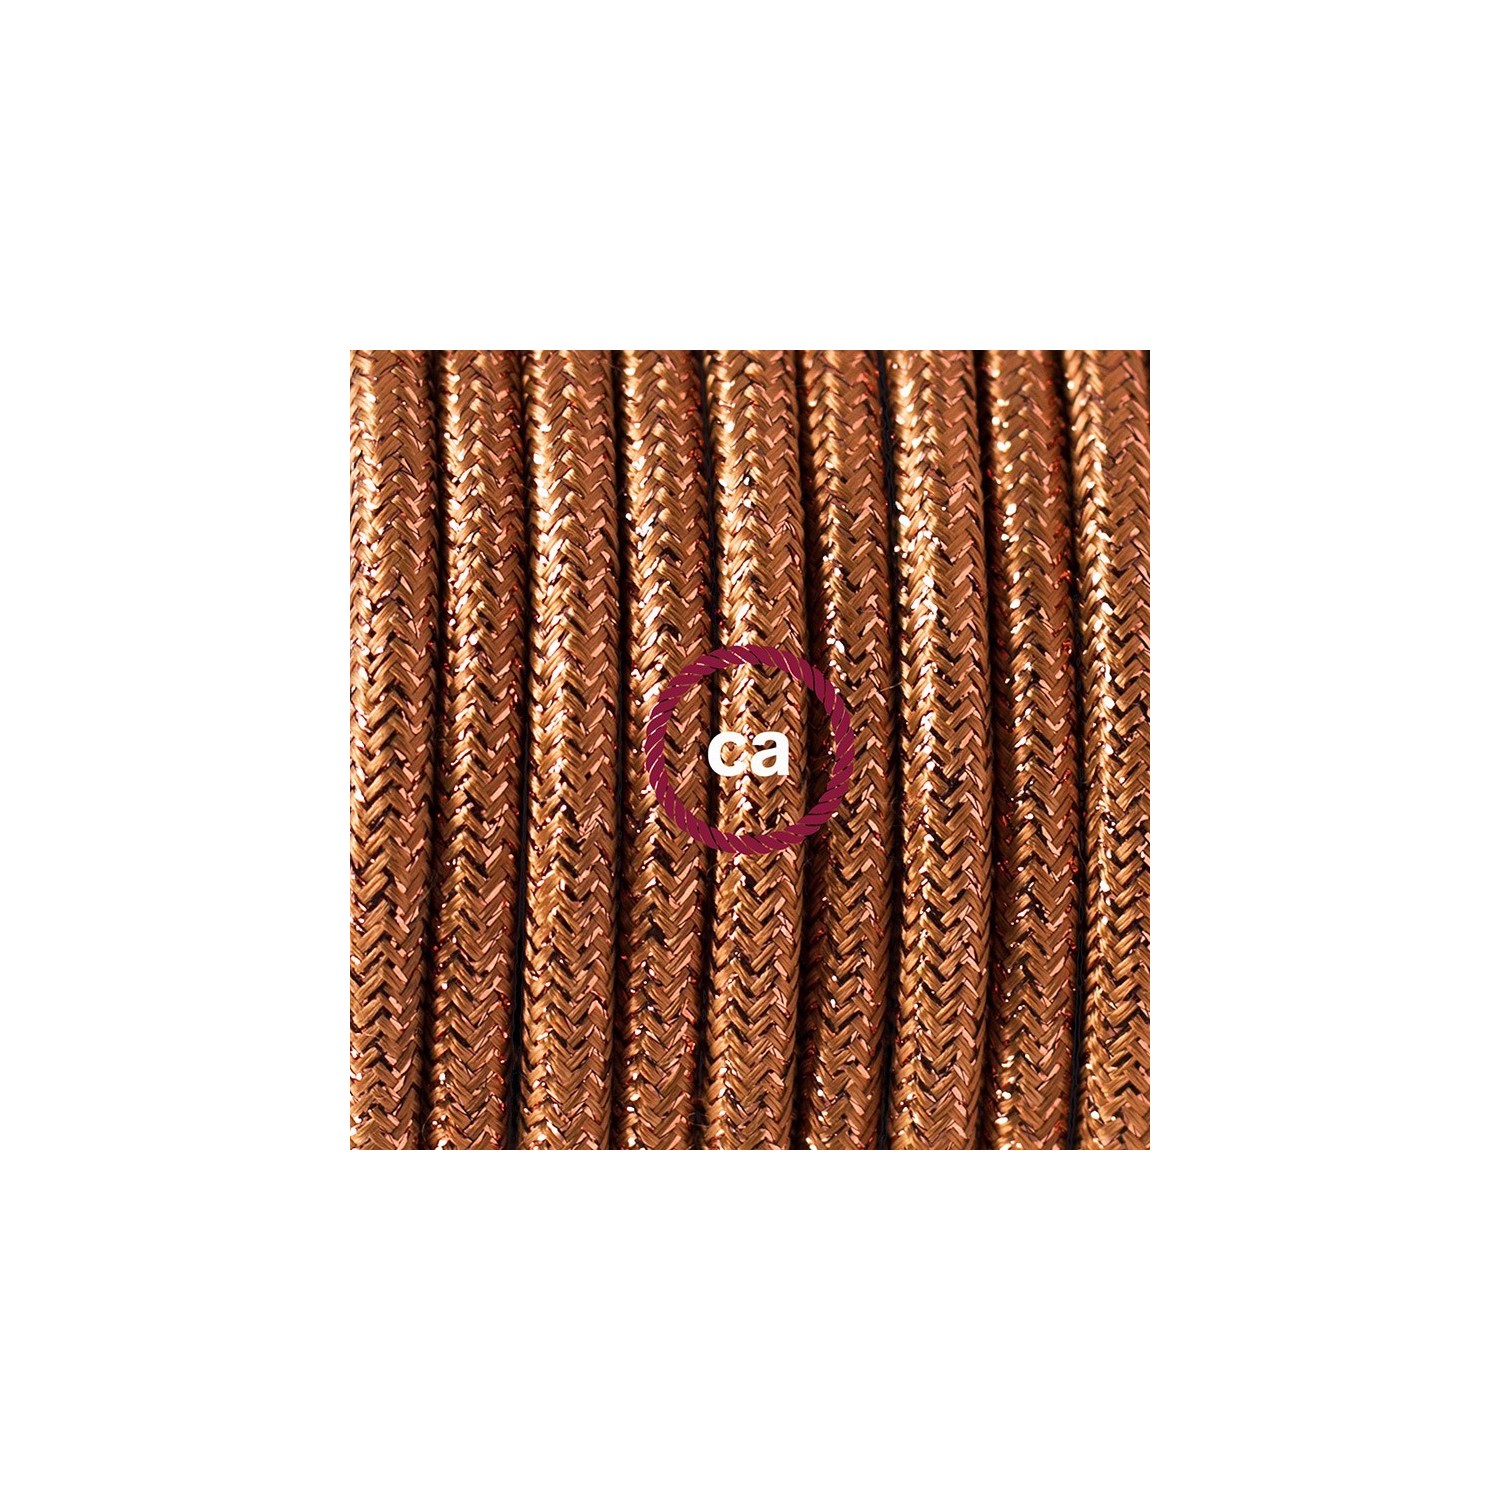 Create your RL22 Glittering Copper Snake and bring the light wherever you want.